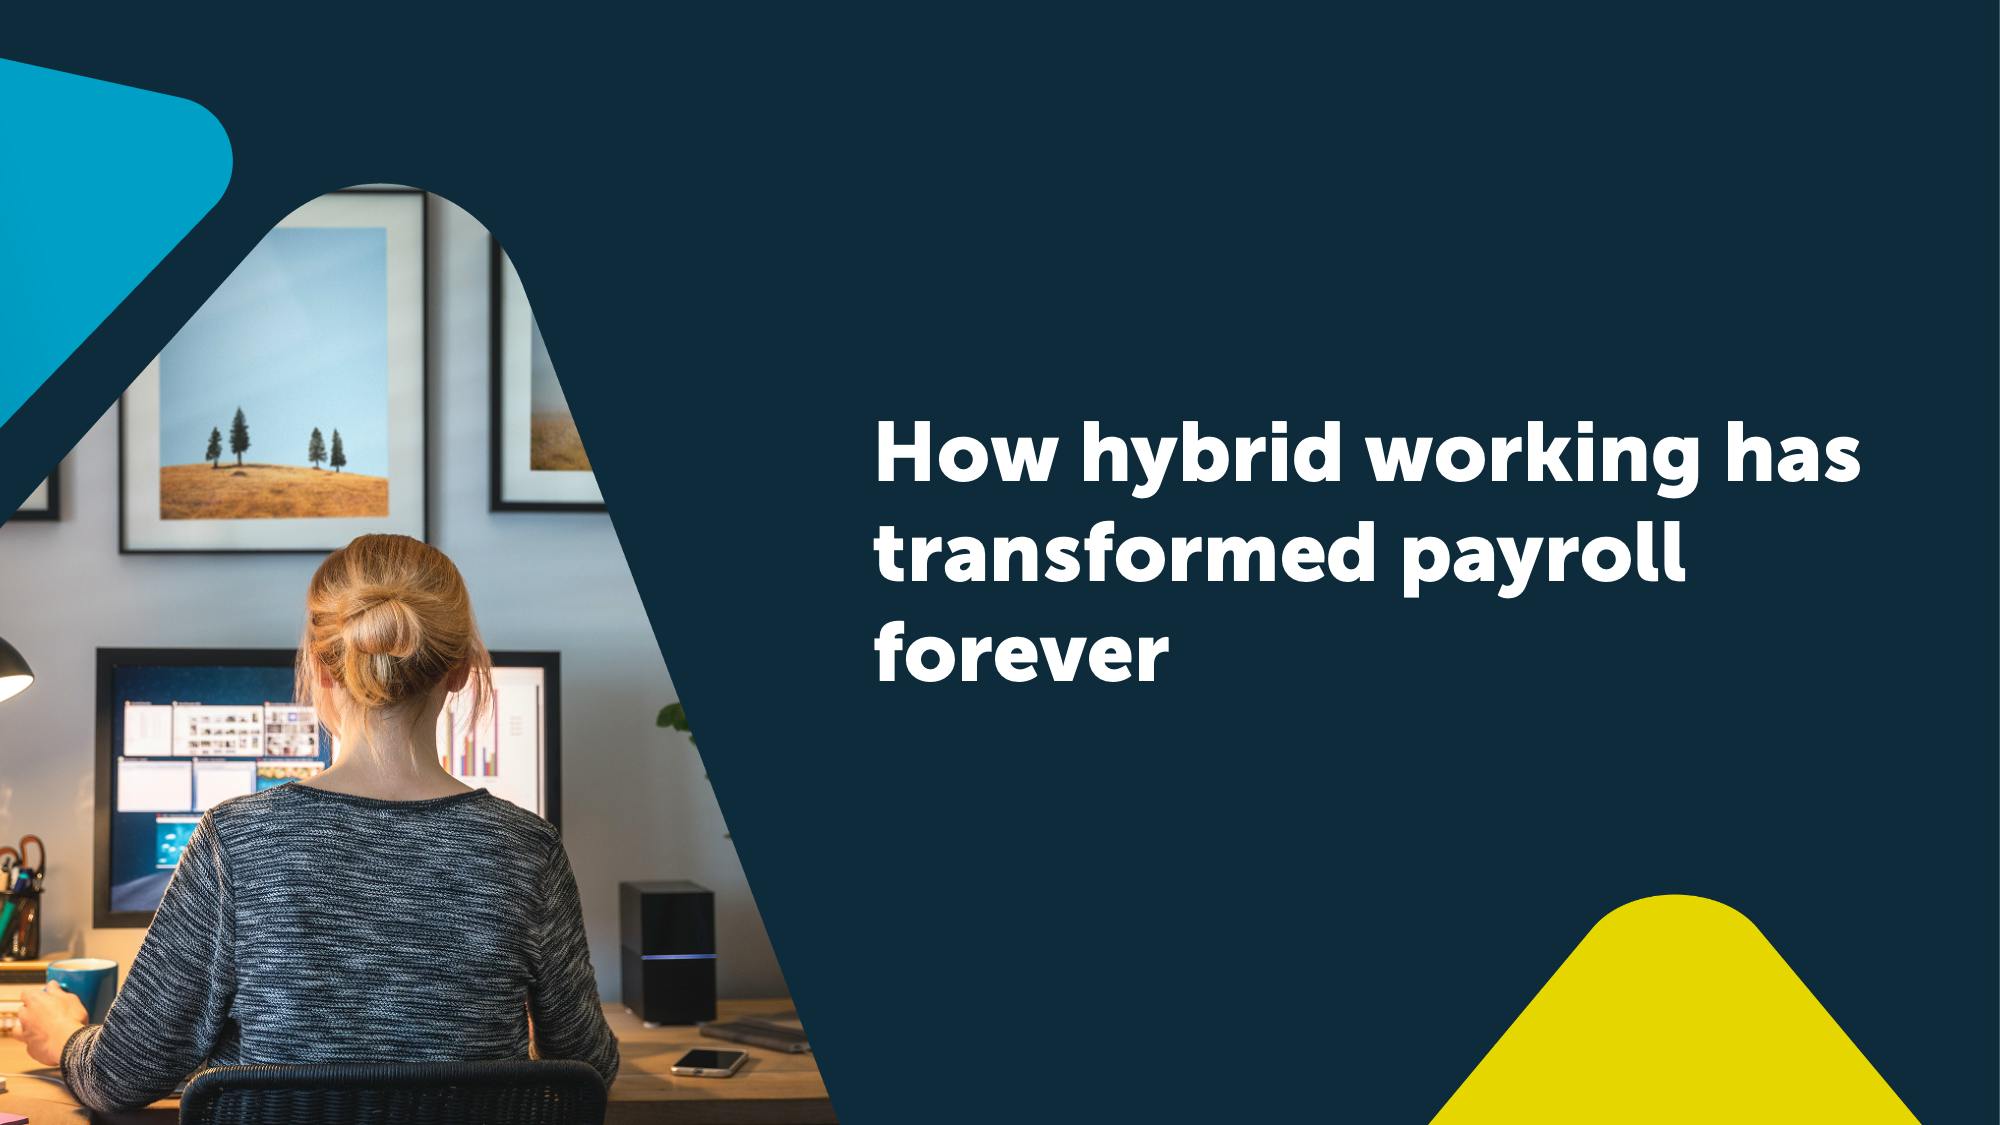 How hybrid working has transformed payroll forever